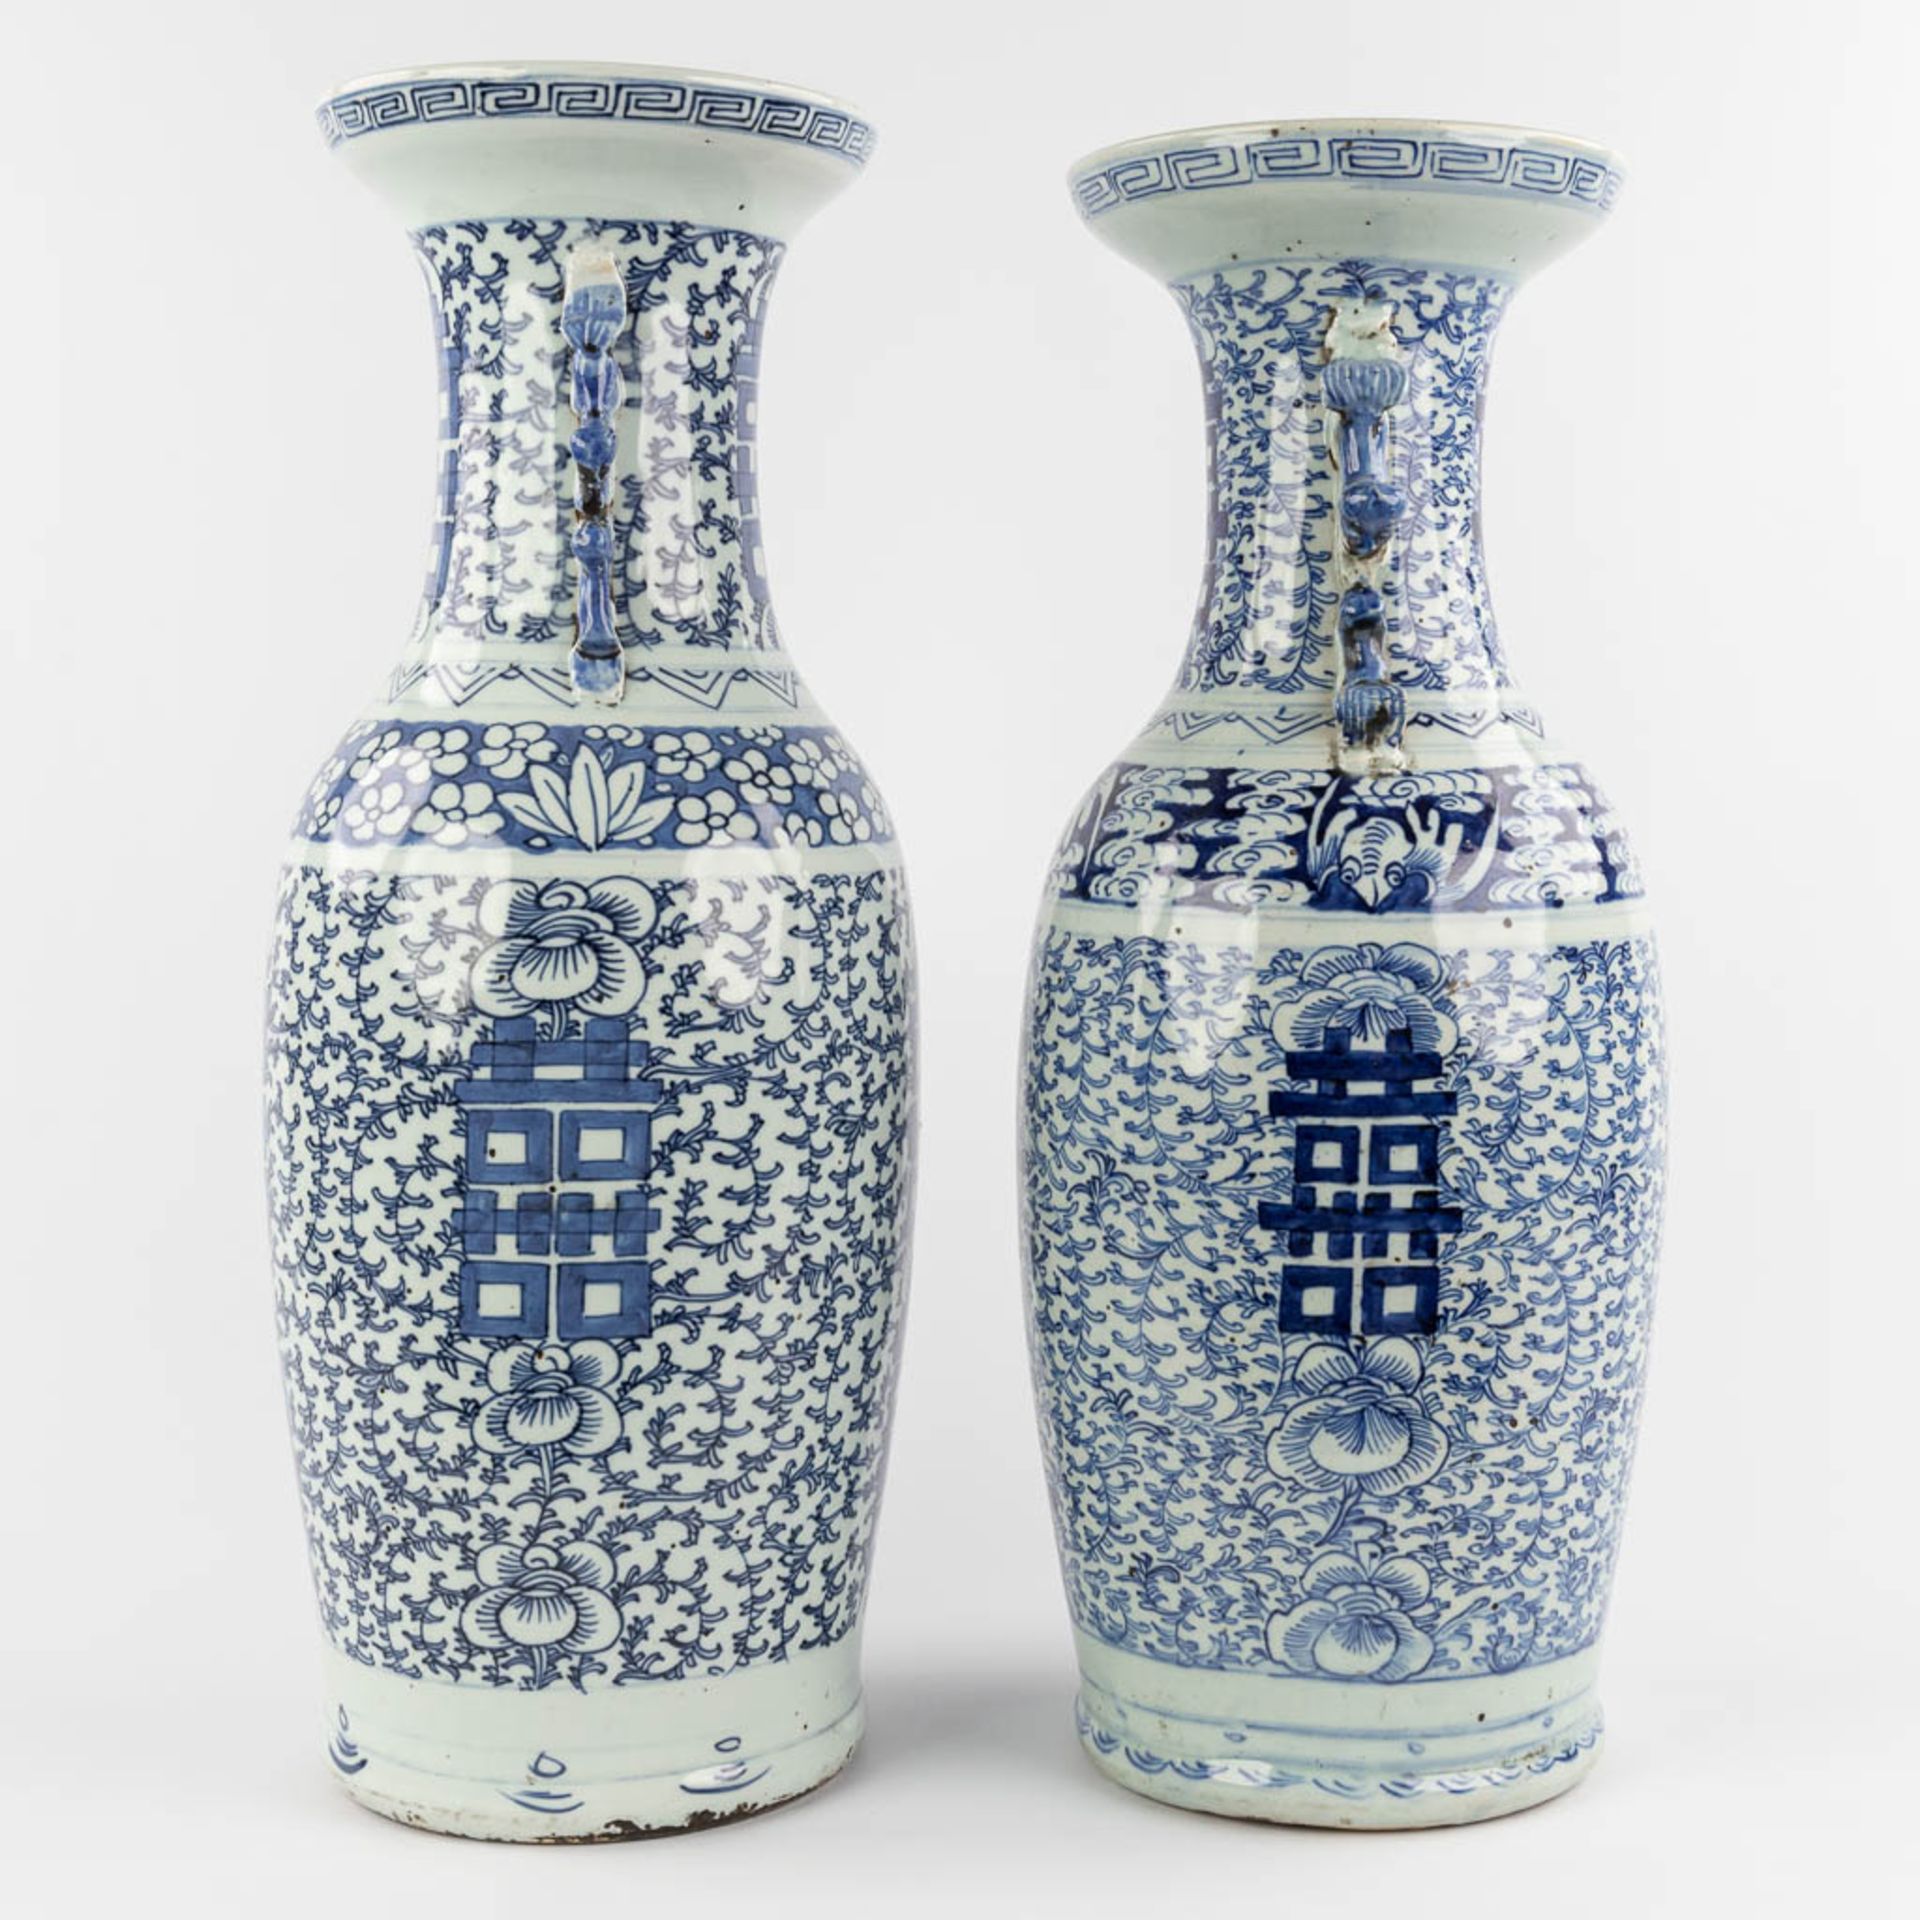 Two Chinese vases with blue-white double xi-sign of happiness. 19th/20th C. (H:60 x D:21 cm) - Image 6 of 12